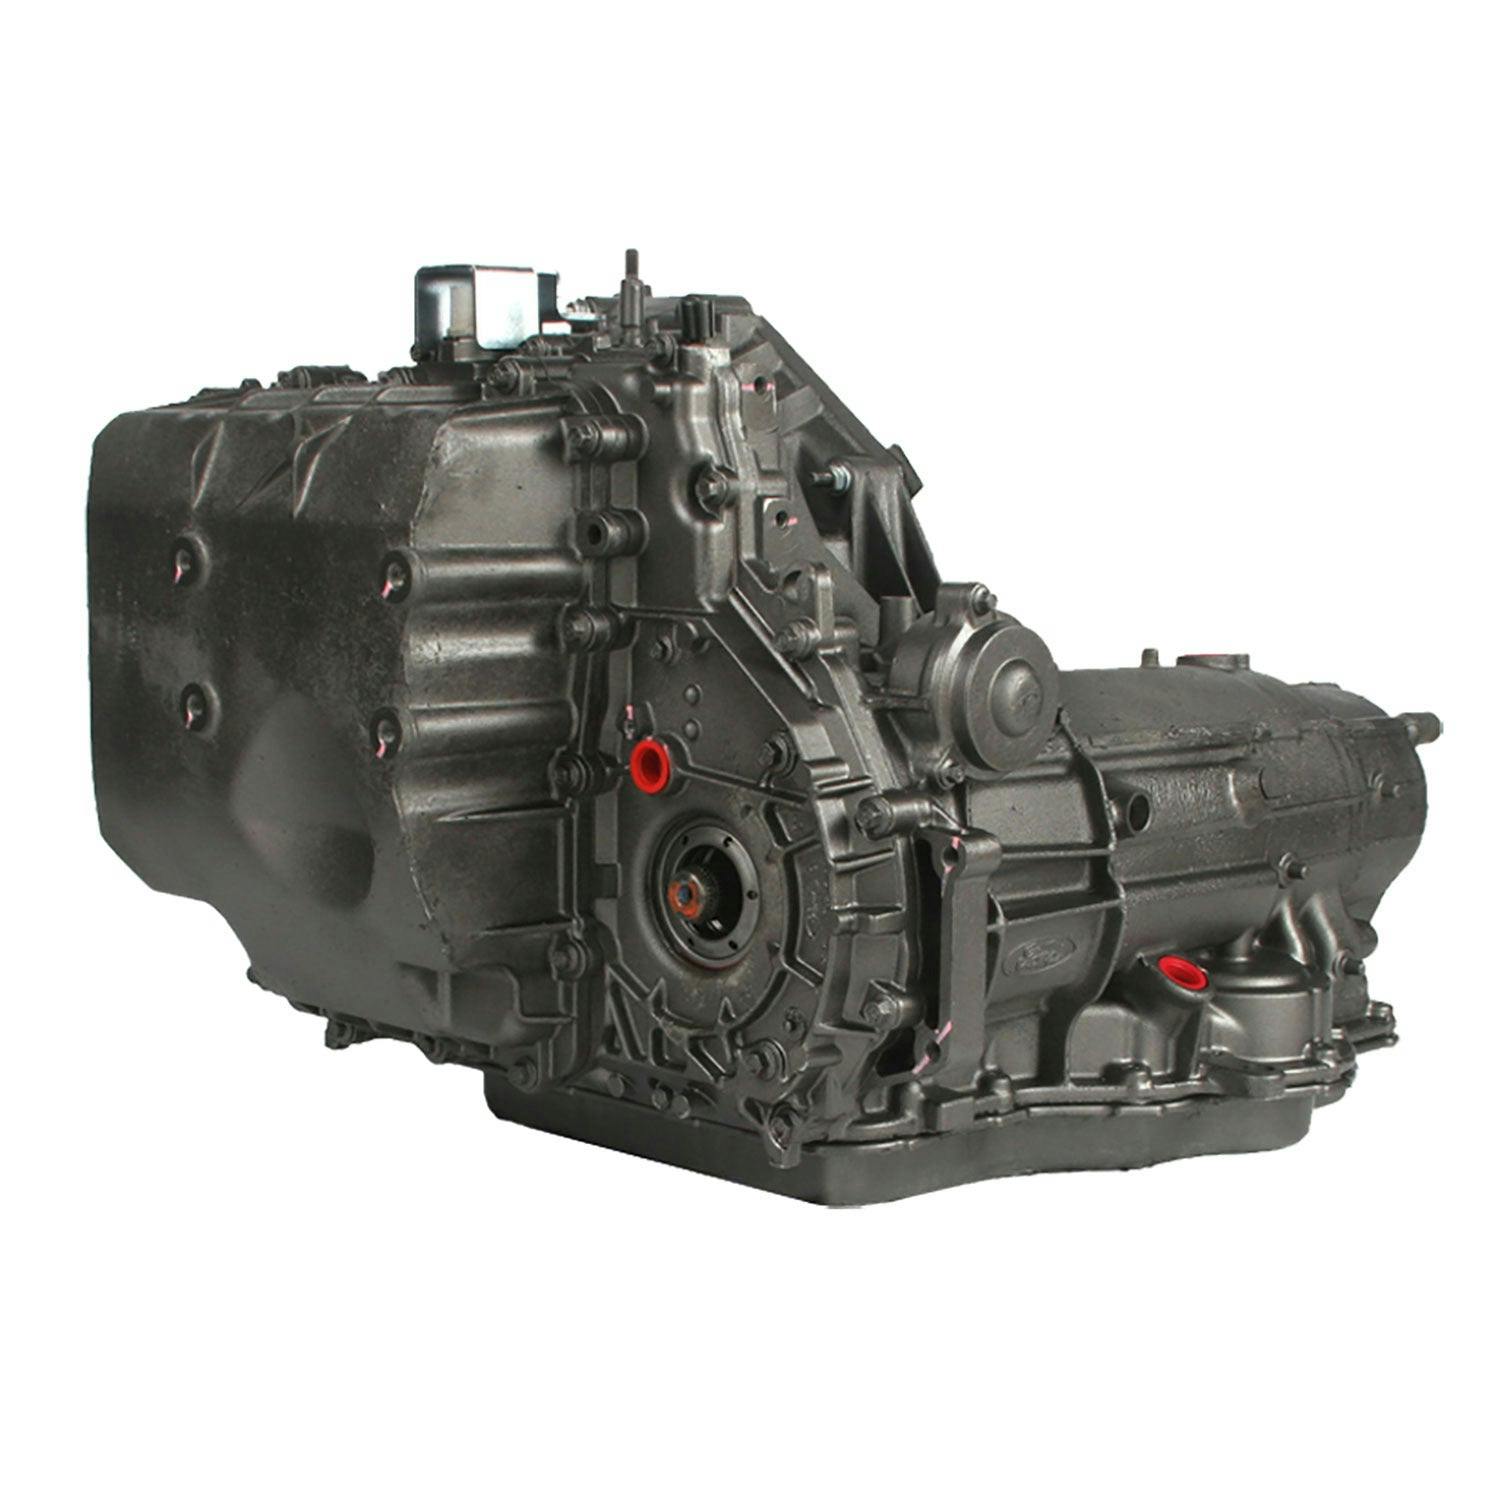 Automatic Transmission for 1999-2000 Lincoln Continental FWD with 4.6L V8 Engine